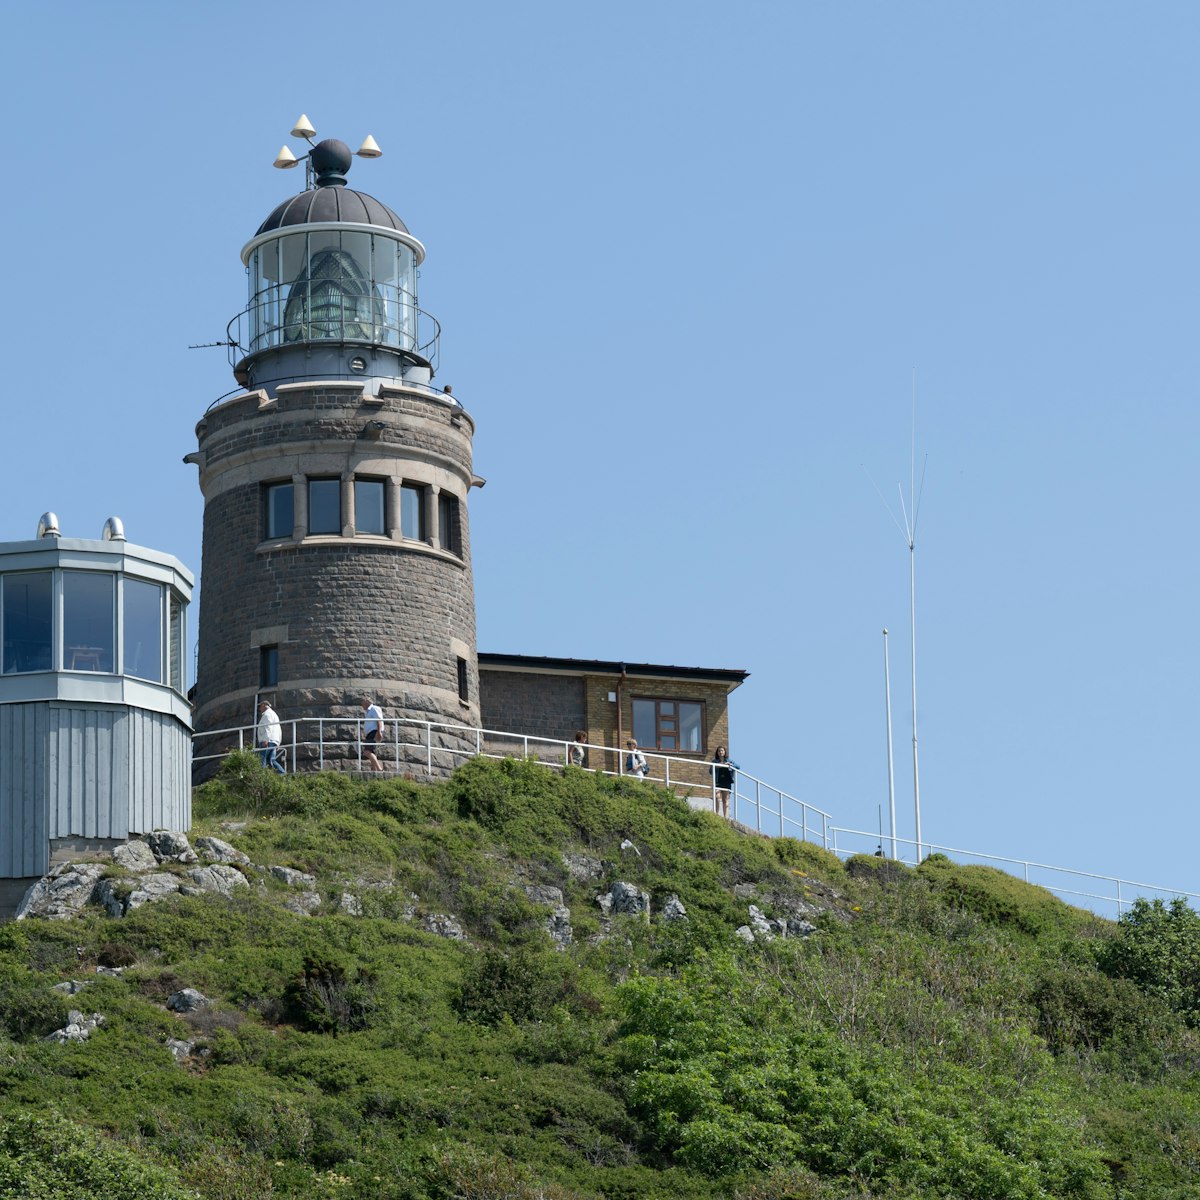 The Kullen Lighthouse on a summer day with clear blue sky at Kullaberg Nature Reserve in South Sweden.